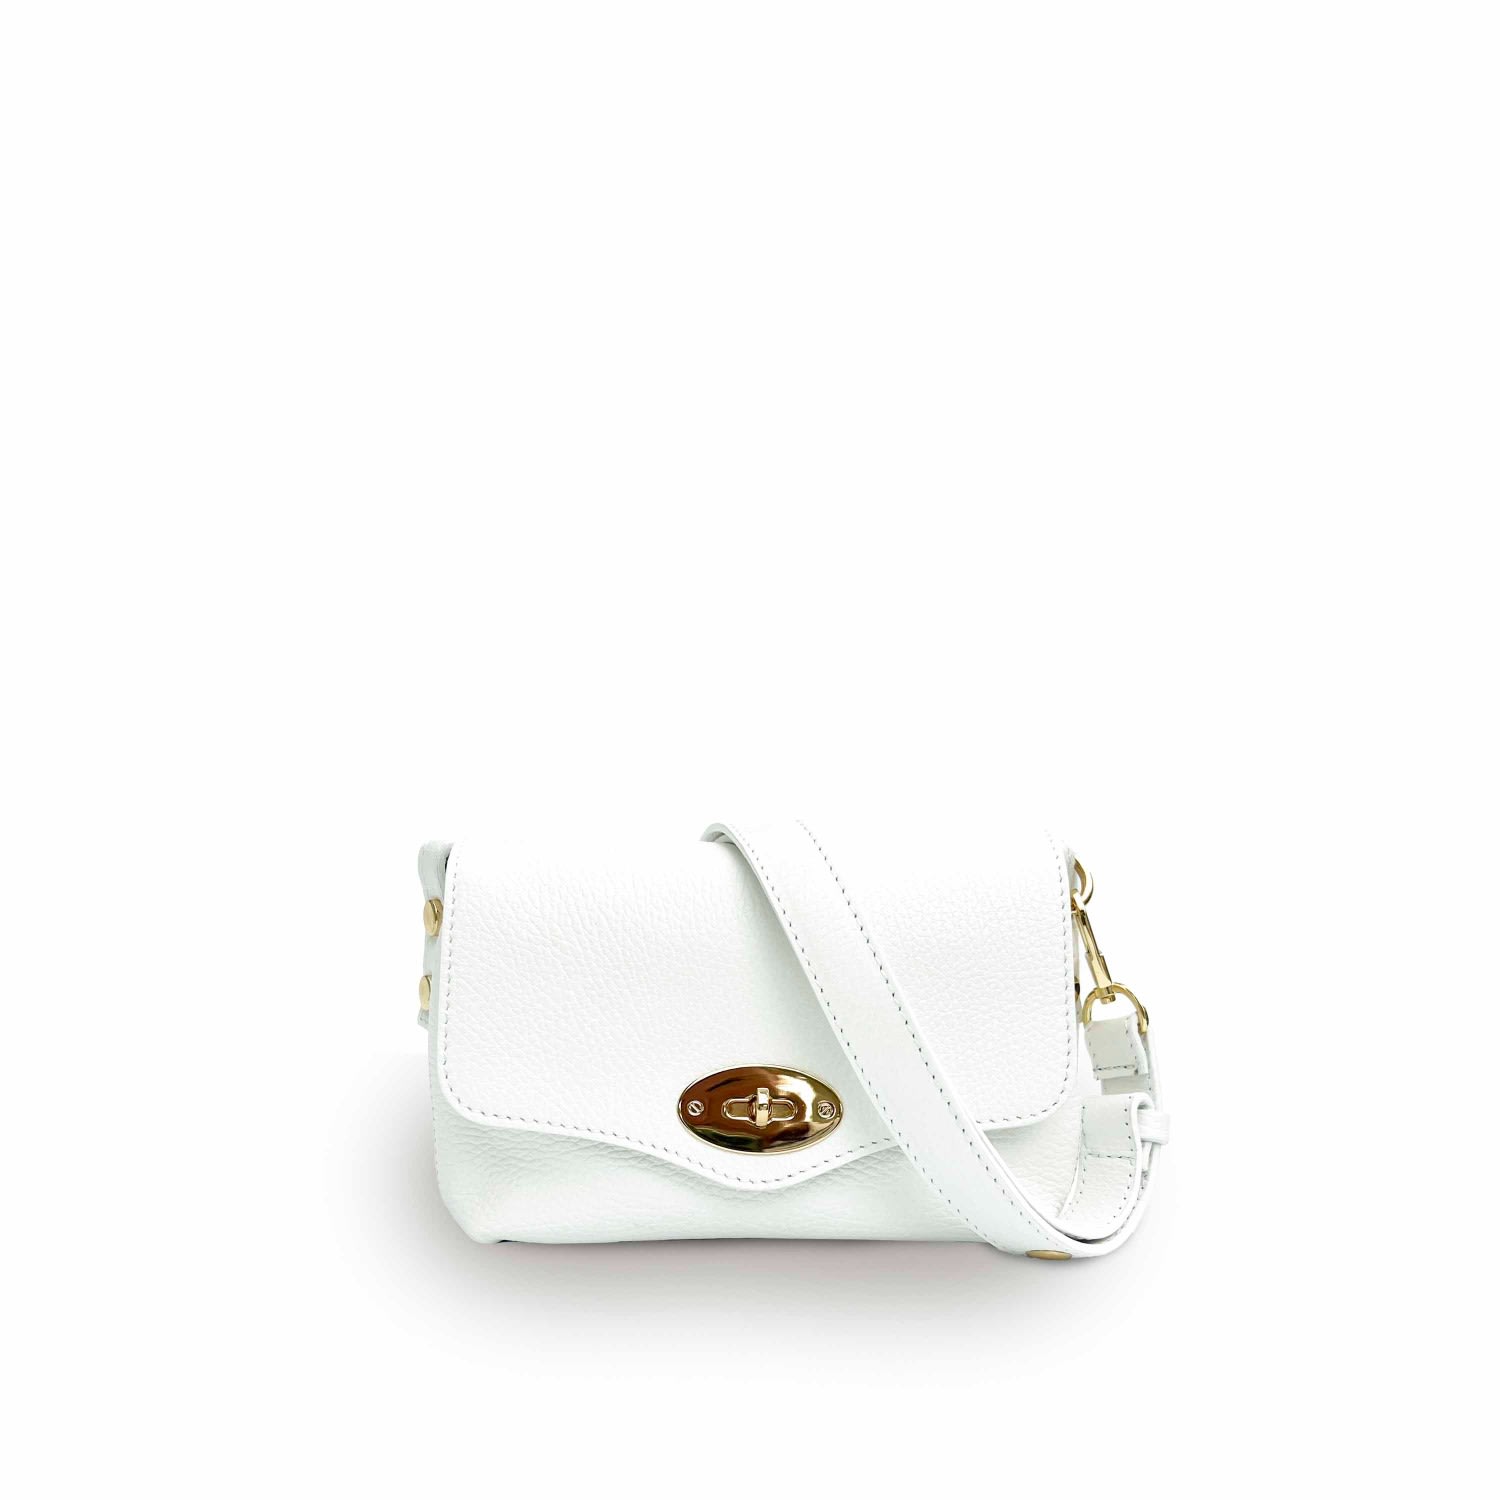 Apatchy London Women's The Maddie White Leather Bag